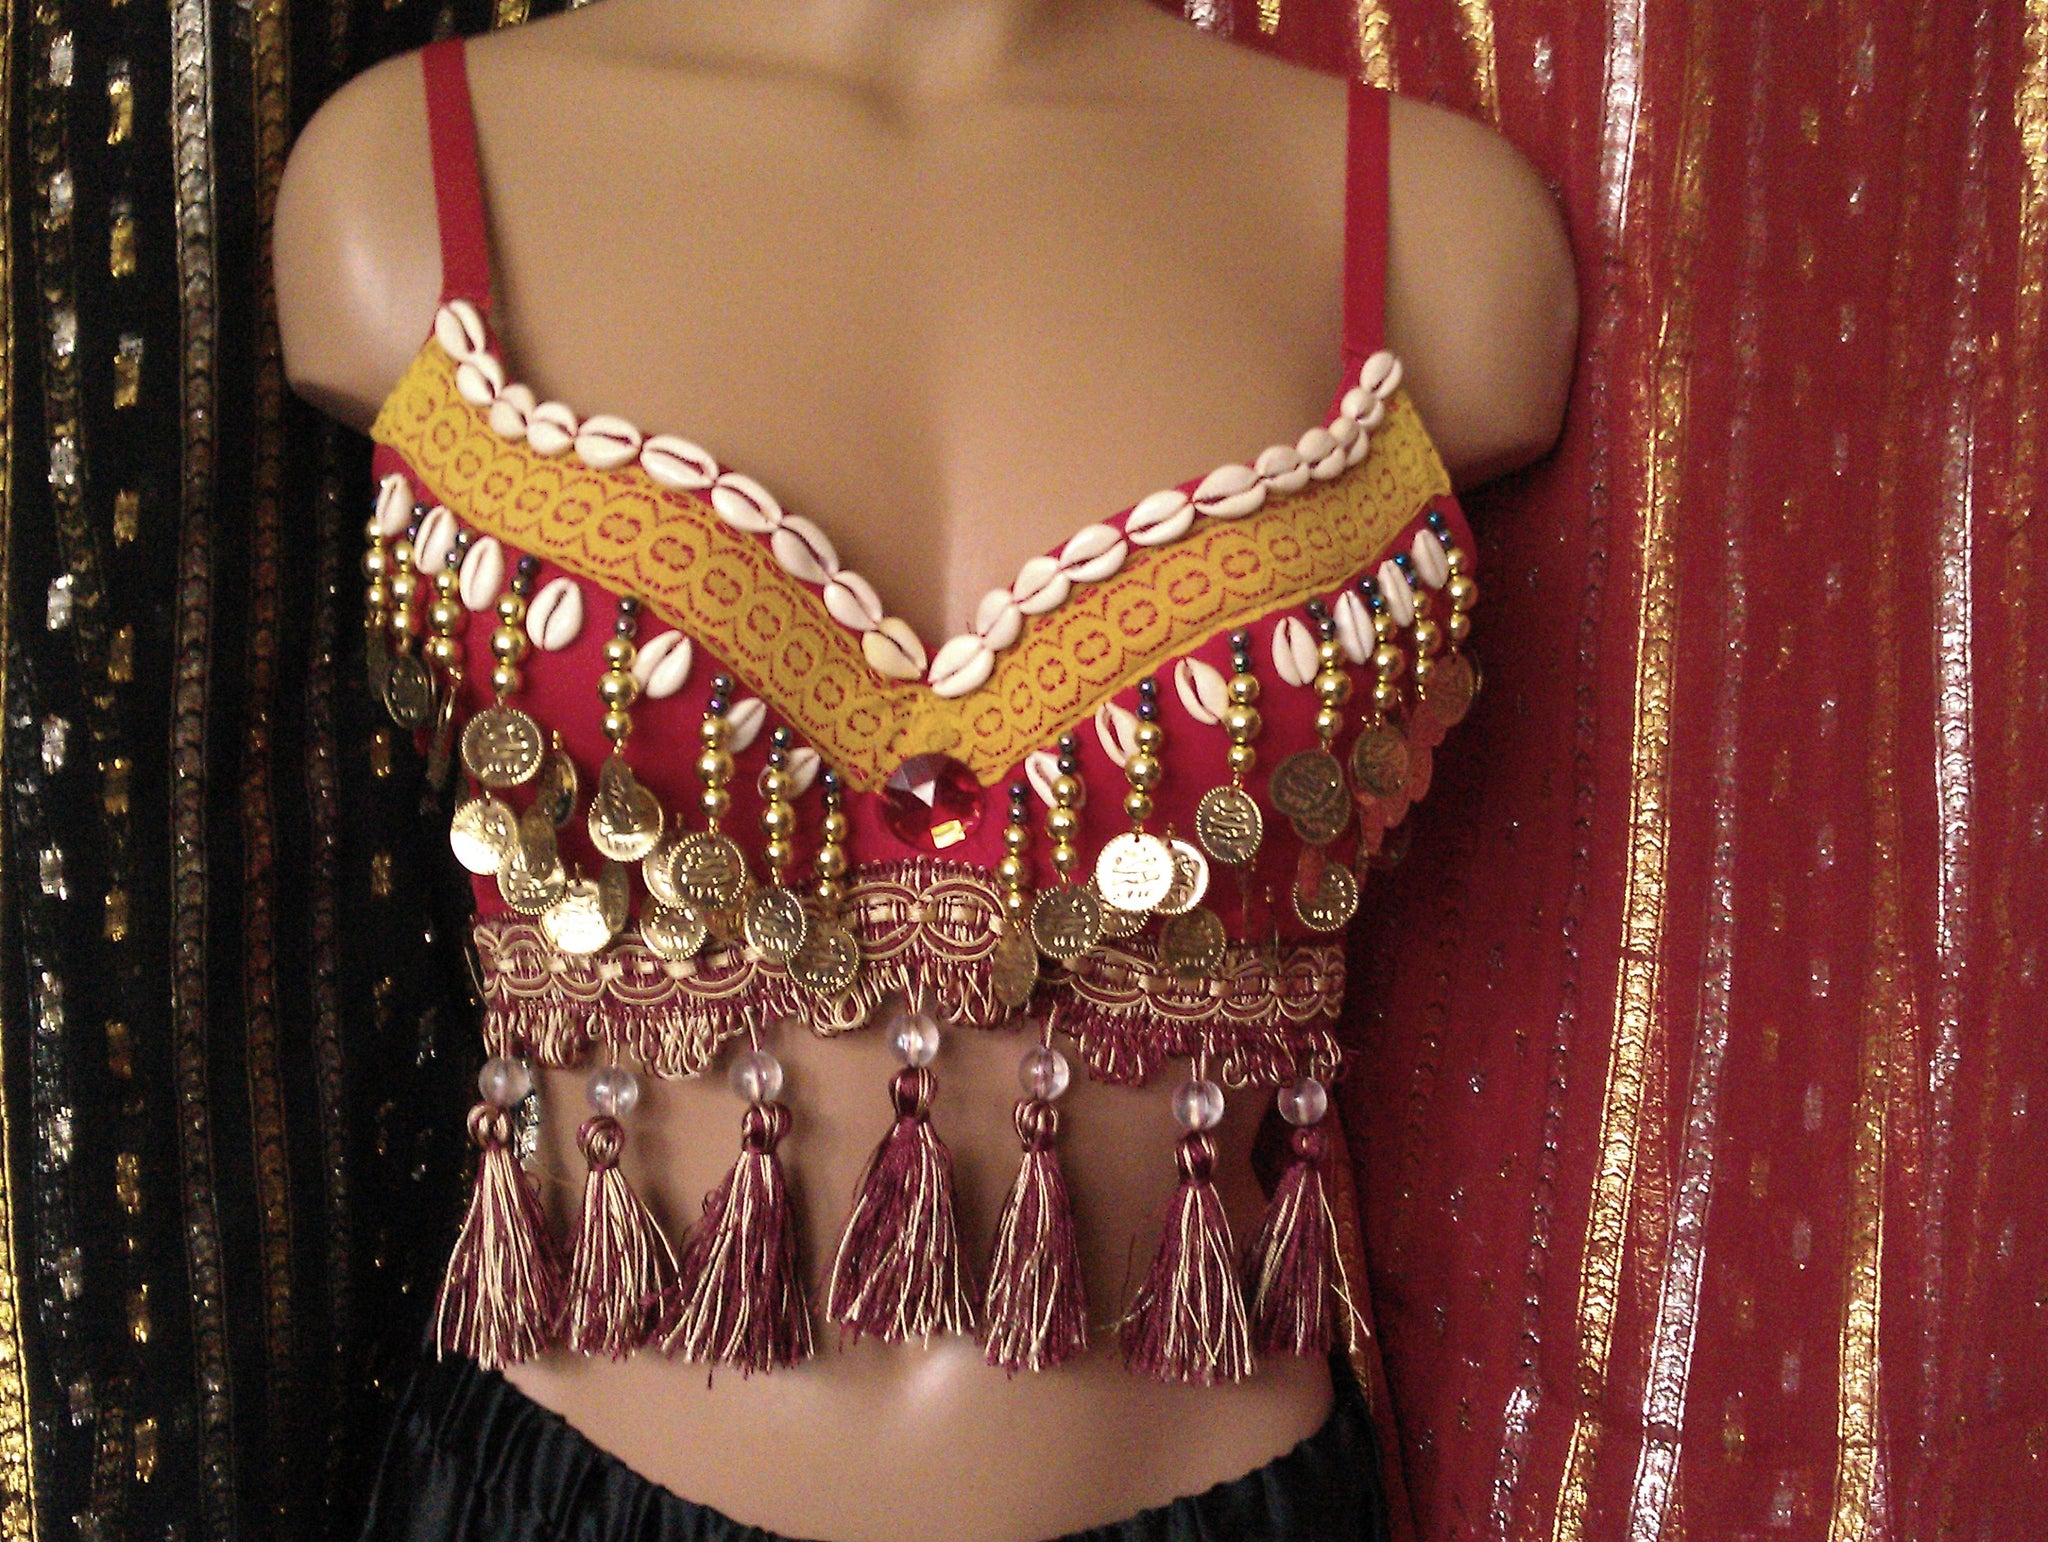 Red Tribal Belly Dance Bra Top Cowrie Shells Coins with Tassels